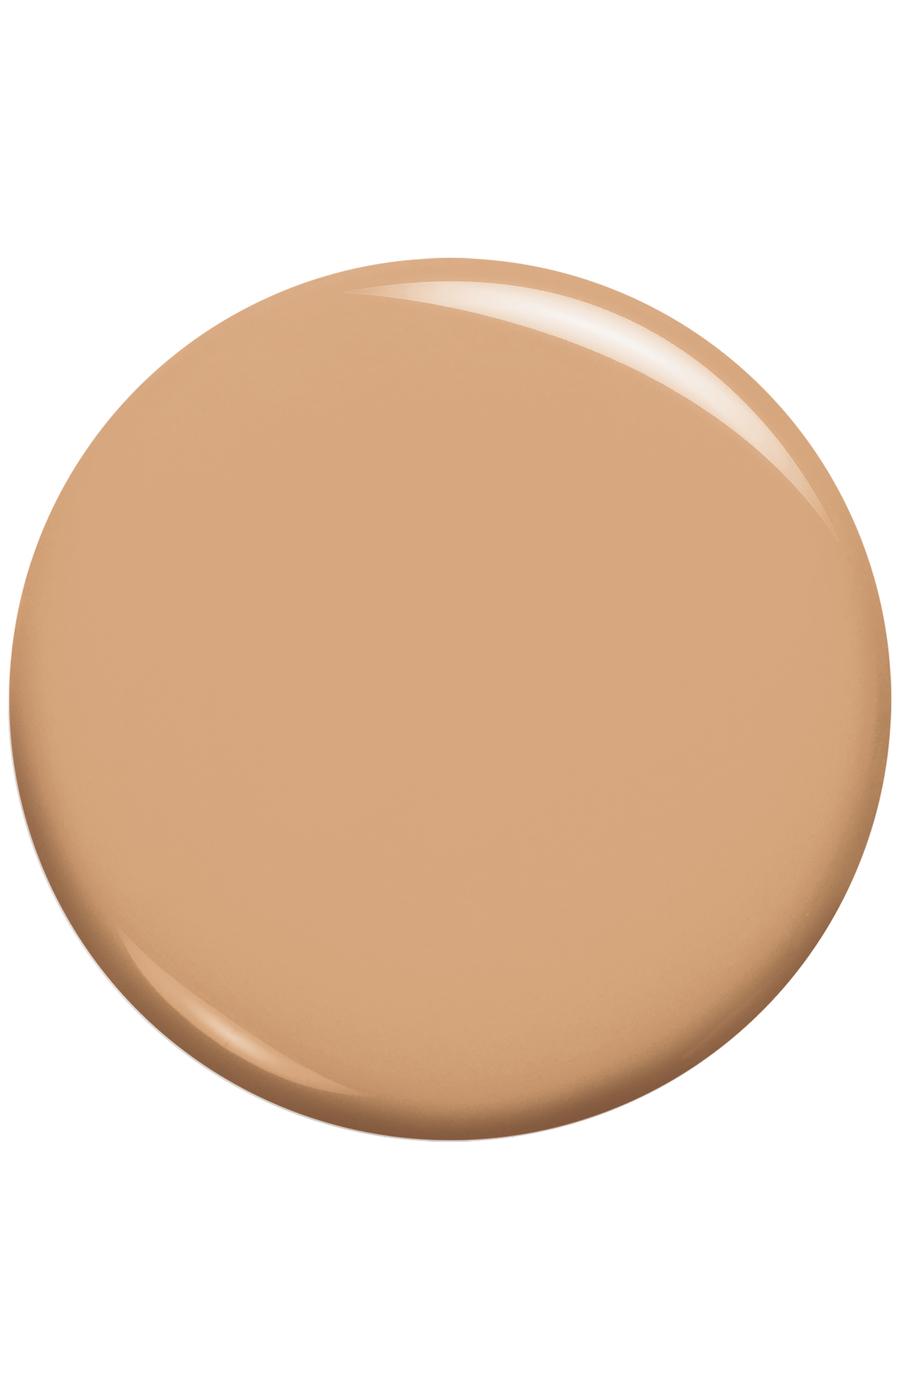 L'Oréal Paris Infallible Up to 24 Hour Fresh Wear Foundation - Lightweight Radiant Honey; image 4 of 7